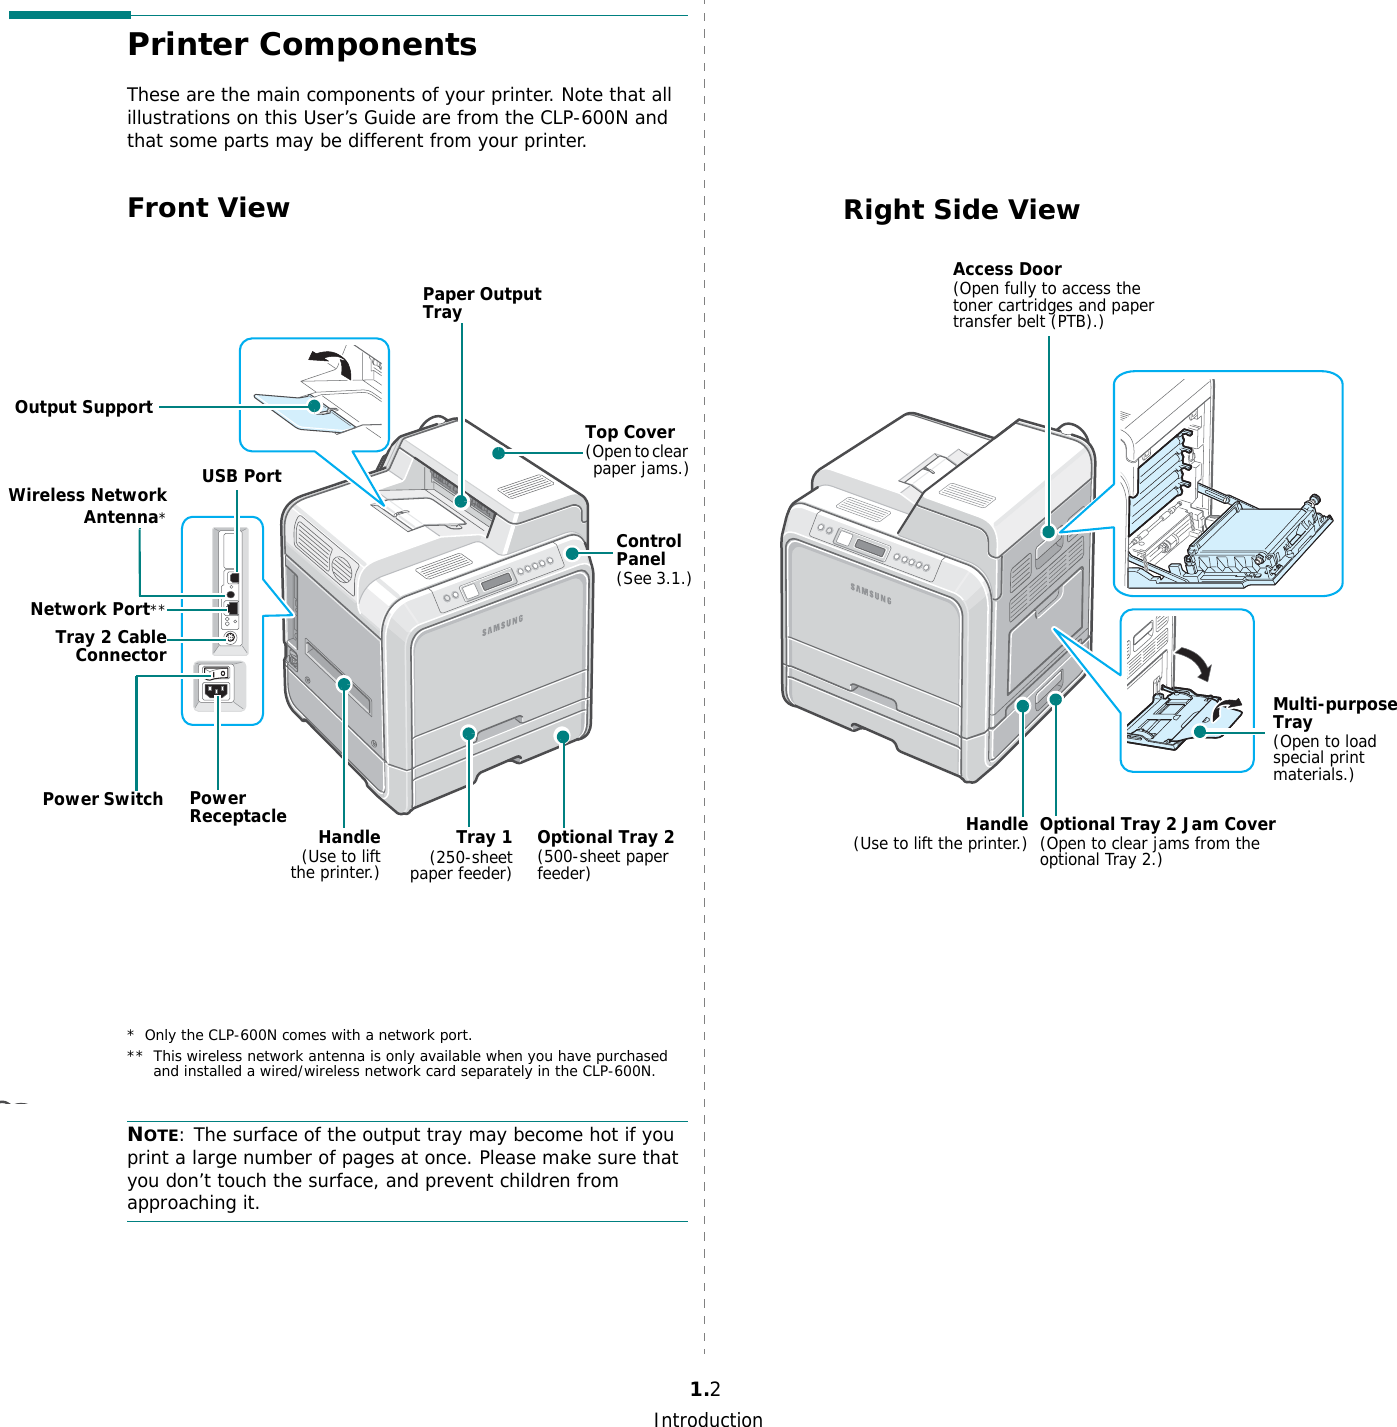 Introduction1.2Printer ComponentsThese are the main components of your printer. Note that all illustrations on this User’s Guide are from the CLP-600N and that some parts may be different from your printer.Front ViewNOTE: The surface of the output tray may become hot if you print a large number of pages at once. Please make sure that you don’t touch the surface, and prevent children from approaching it.Paper Output TrayOutput SupportControl Panel(See 3.1.)* Only the CLP-600N comes with a network port.** This wireless network antenna is only available when you have purchased and installed a wired/wireless network card separately in the CLP-600N.Top Cover (Open to clear paper jams.)USB PortNetwork Port**Tray 2 CableConnectorWireless NetworkAntenna*Optional Tray 2(500-sheet paper feeder)Handle(Use to liftthe printer.)Tray 1(250-sheetpaper feeder)Power Switch Power ReceptacleRight Side ViewAccess Door (Open fully to access the toner cartridges and paper transfer belt (PTB).)Optional Tray 2 Jam Cover(Open to clear jams from the optional Tray 2.)Handle(Use to lift the printer.)Multi-purpose Tray(Open to load special print materials.)